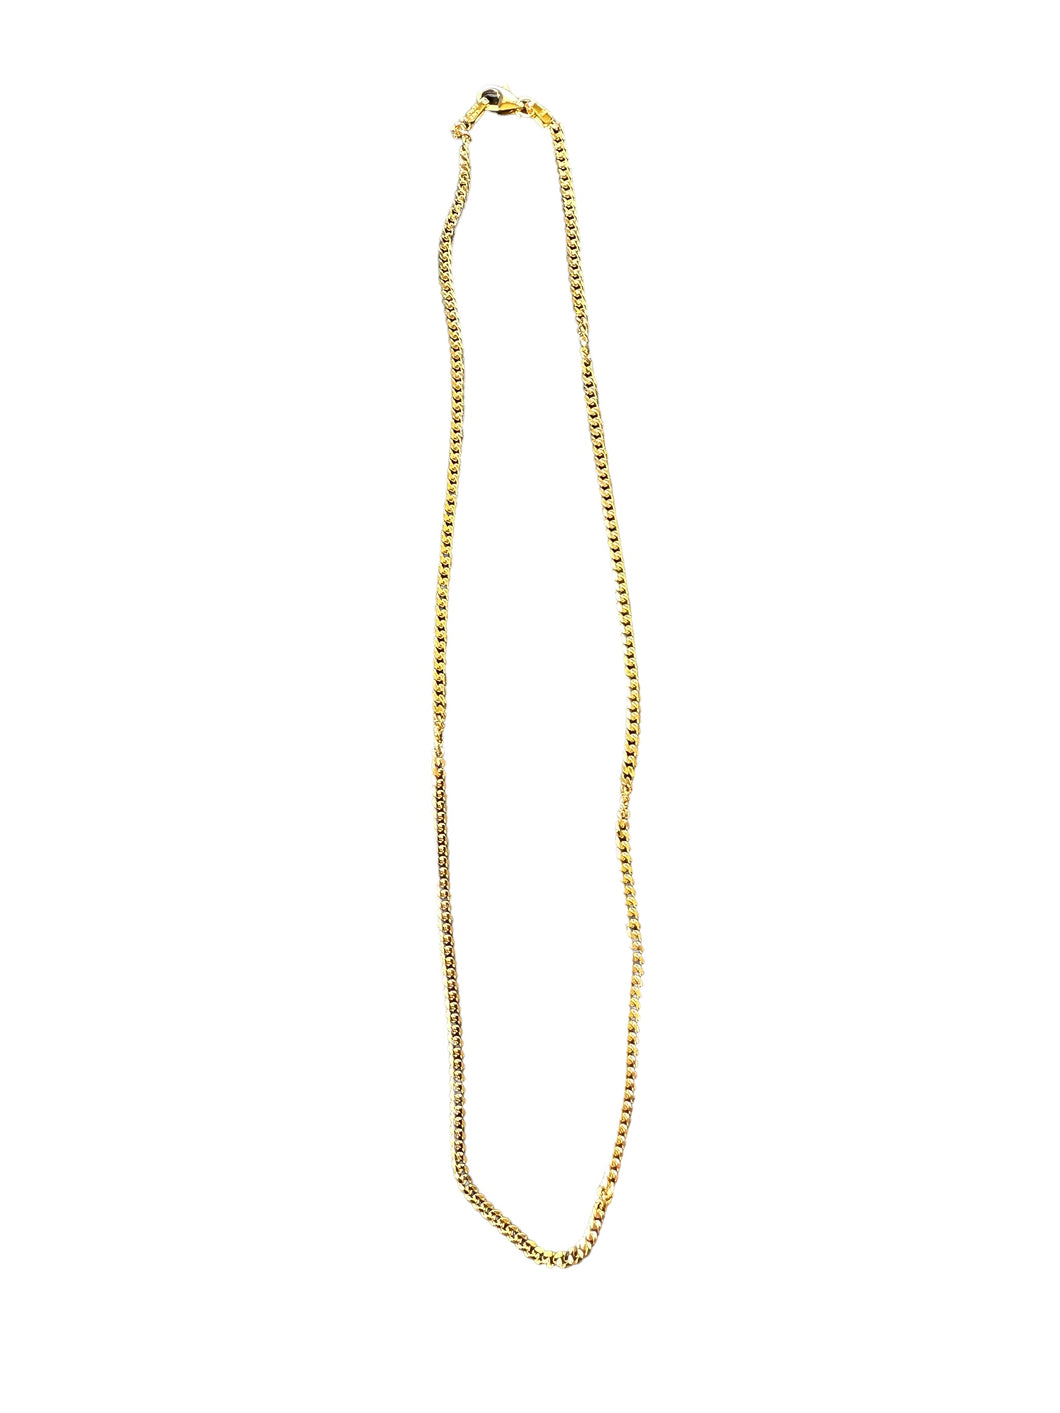 GOLD CURB LINK NECKLACE